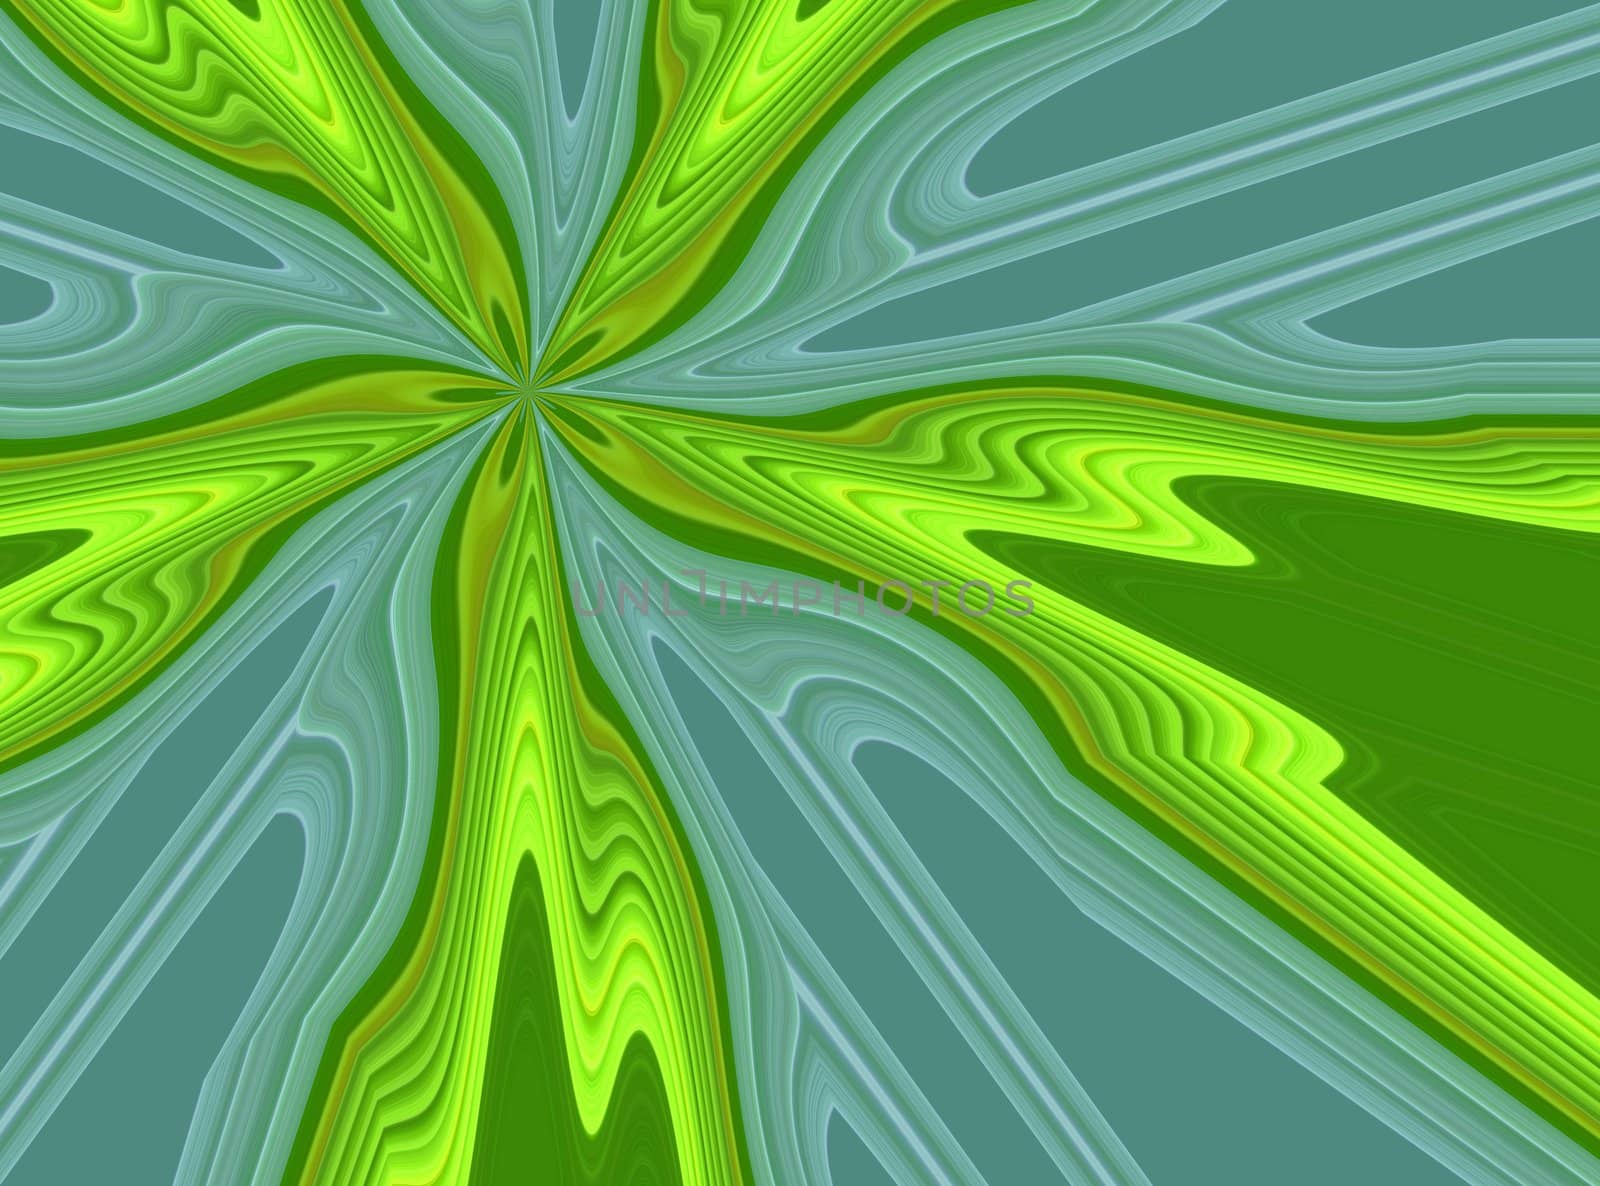 design of abstrcat green wavy patterns as  background and texture